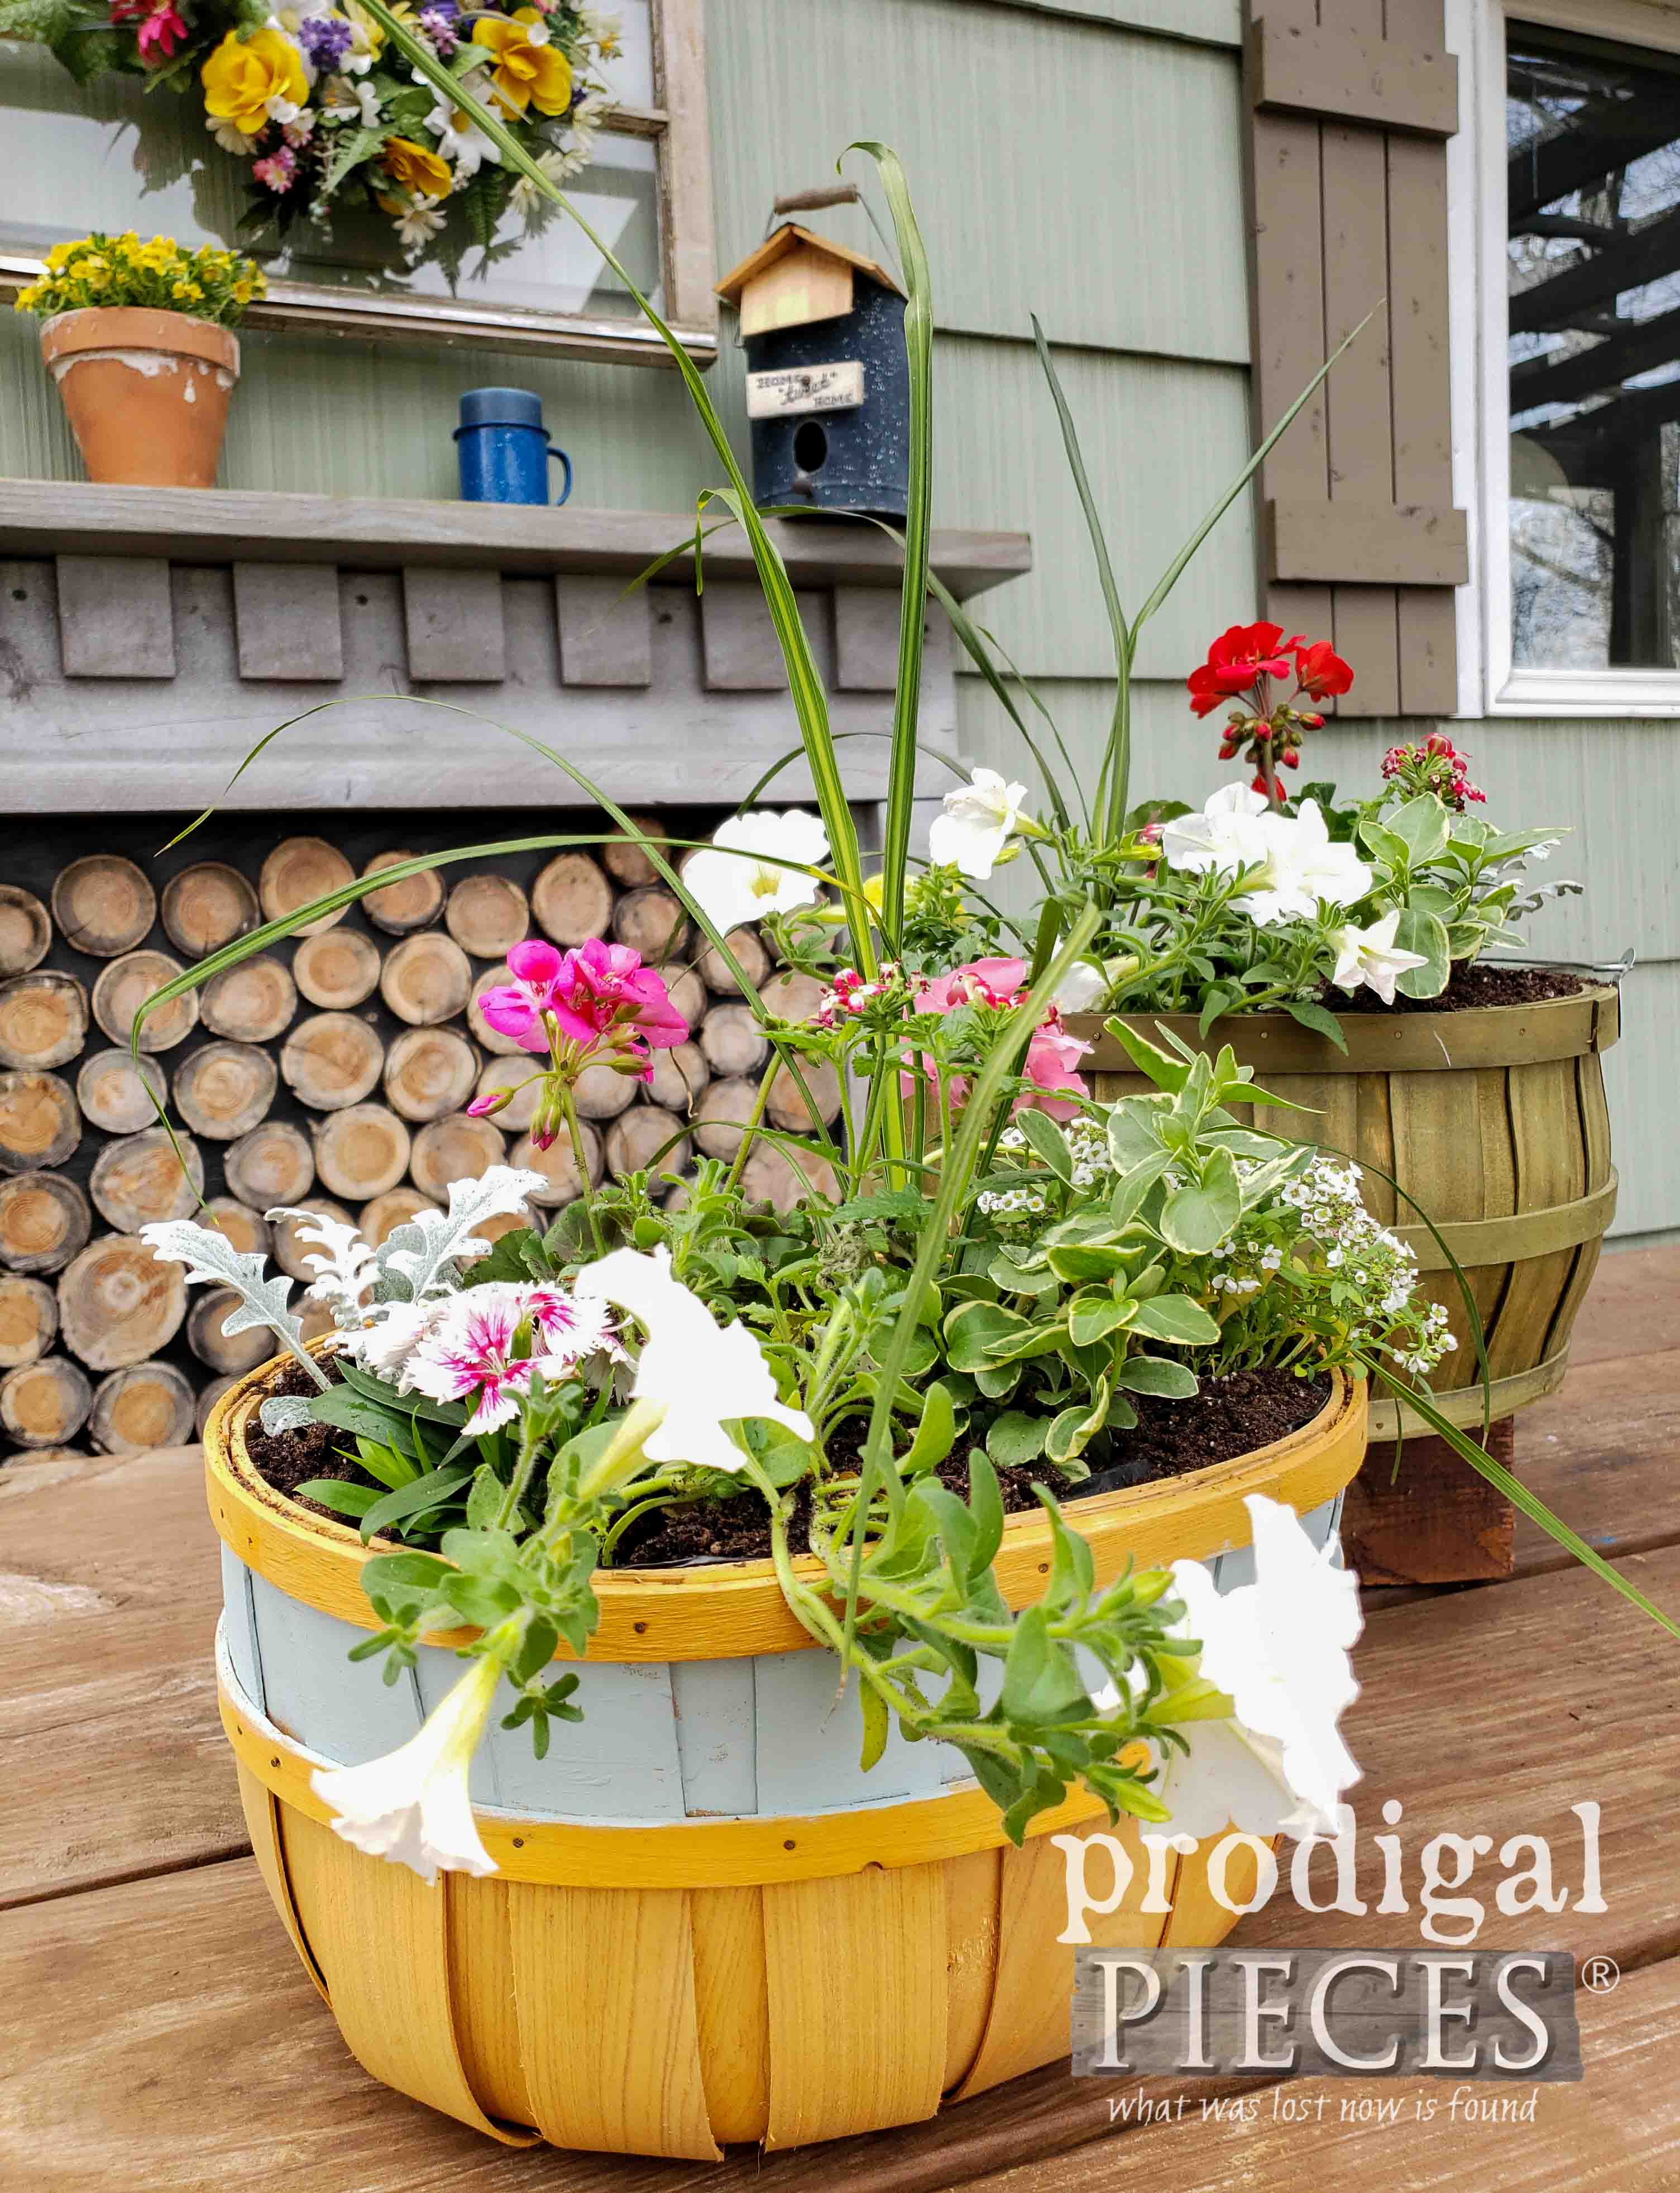 Spring Mother's Day Flower Basket DIY Gift Idea with Video Tutorial by Larissa of Prodigal Pieces | proodigalpieces.com #prodigalpieces #diy #home #mothersday #giftideas #flowers #home #garden